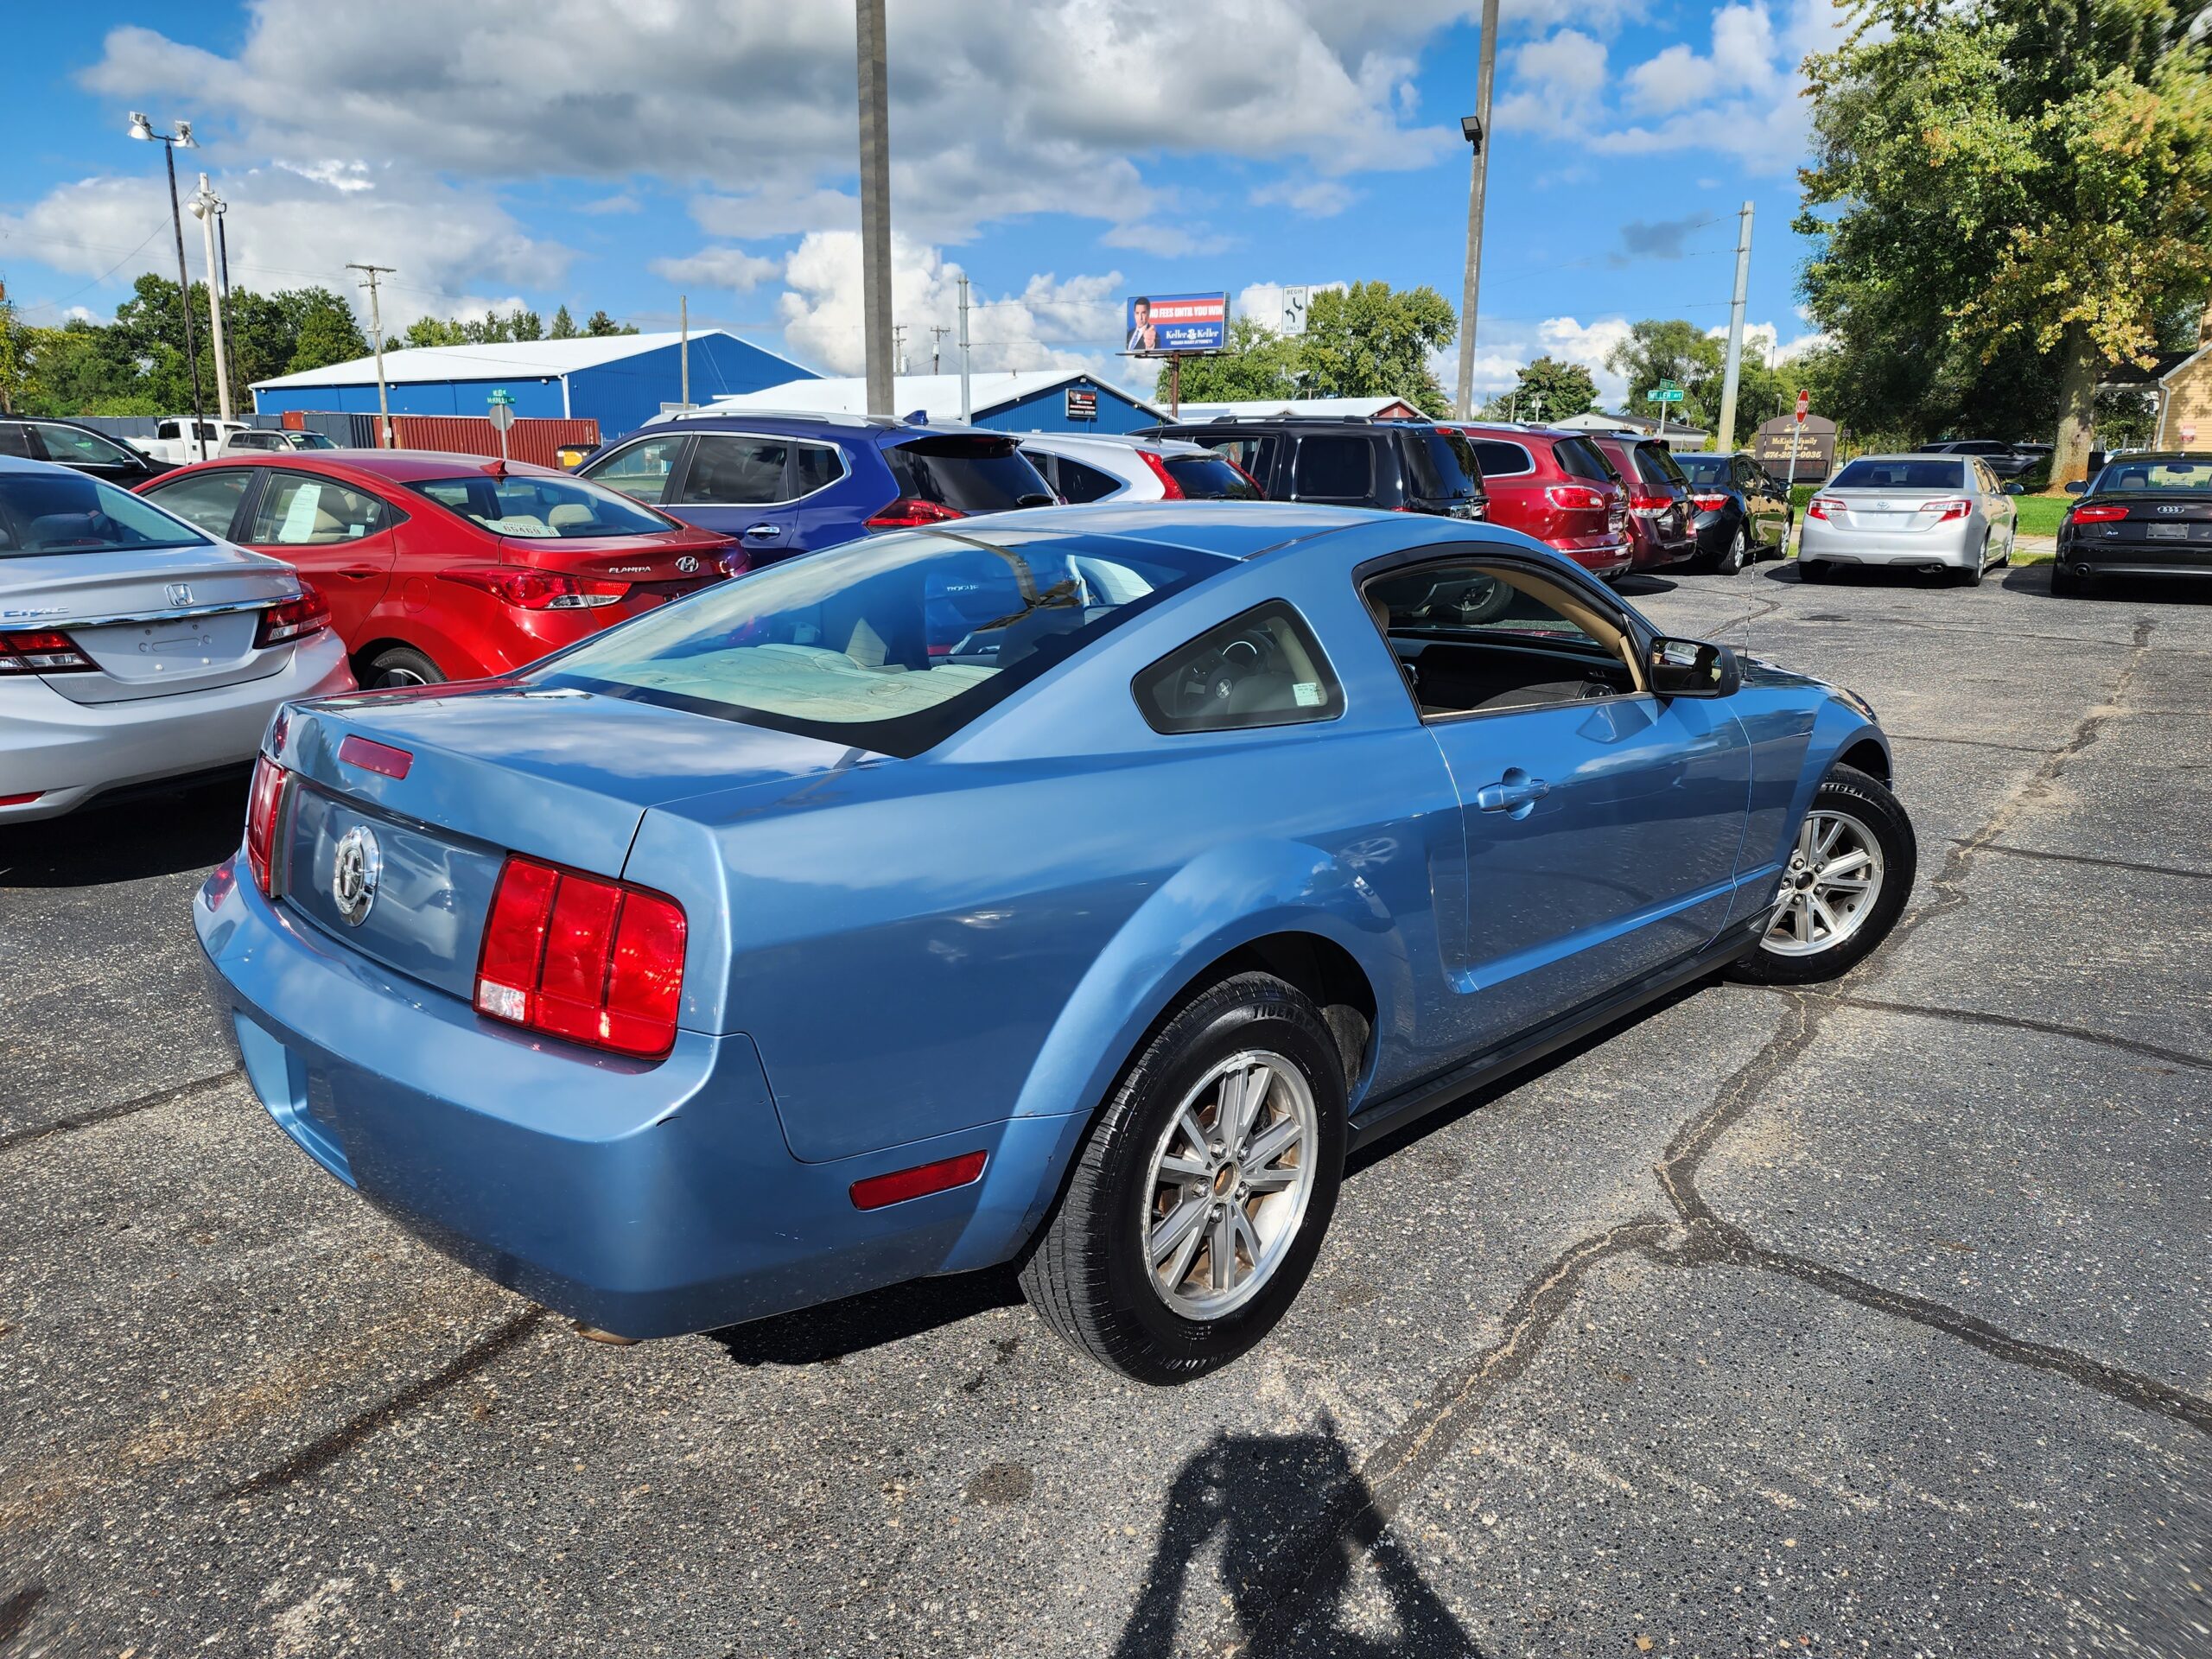 2005 Ford Mustang Deluxe